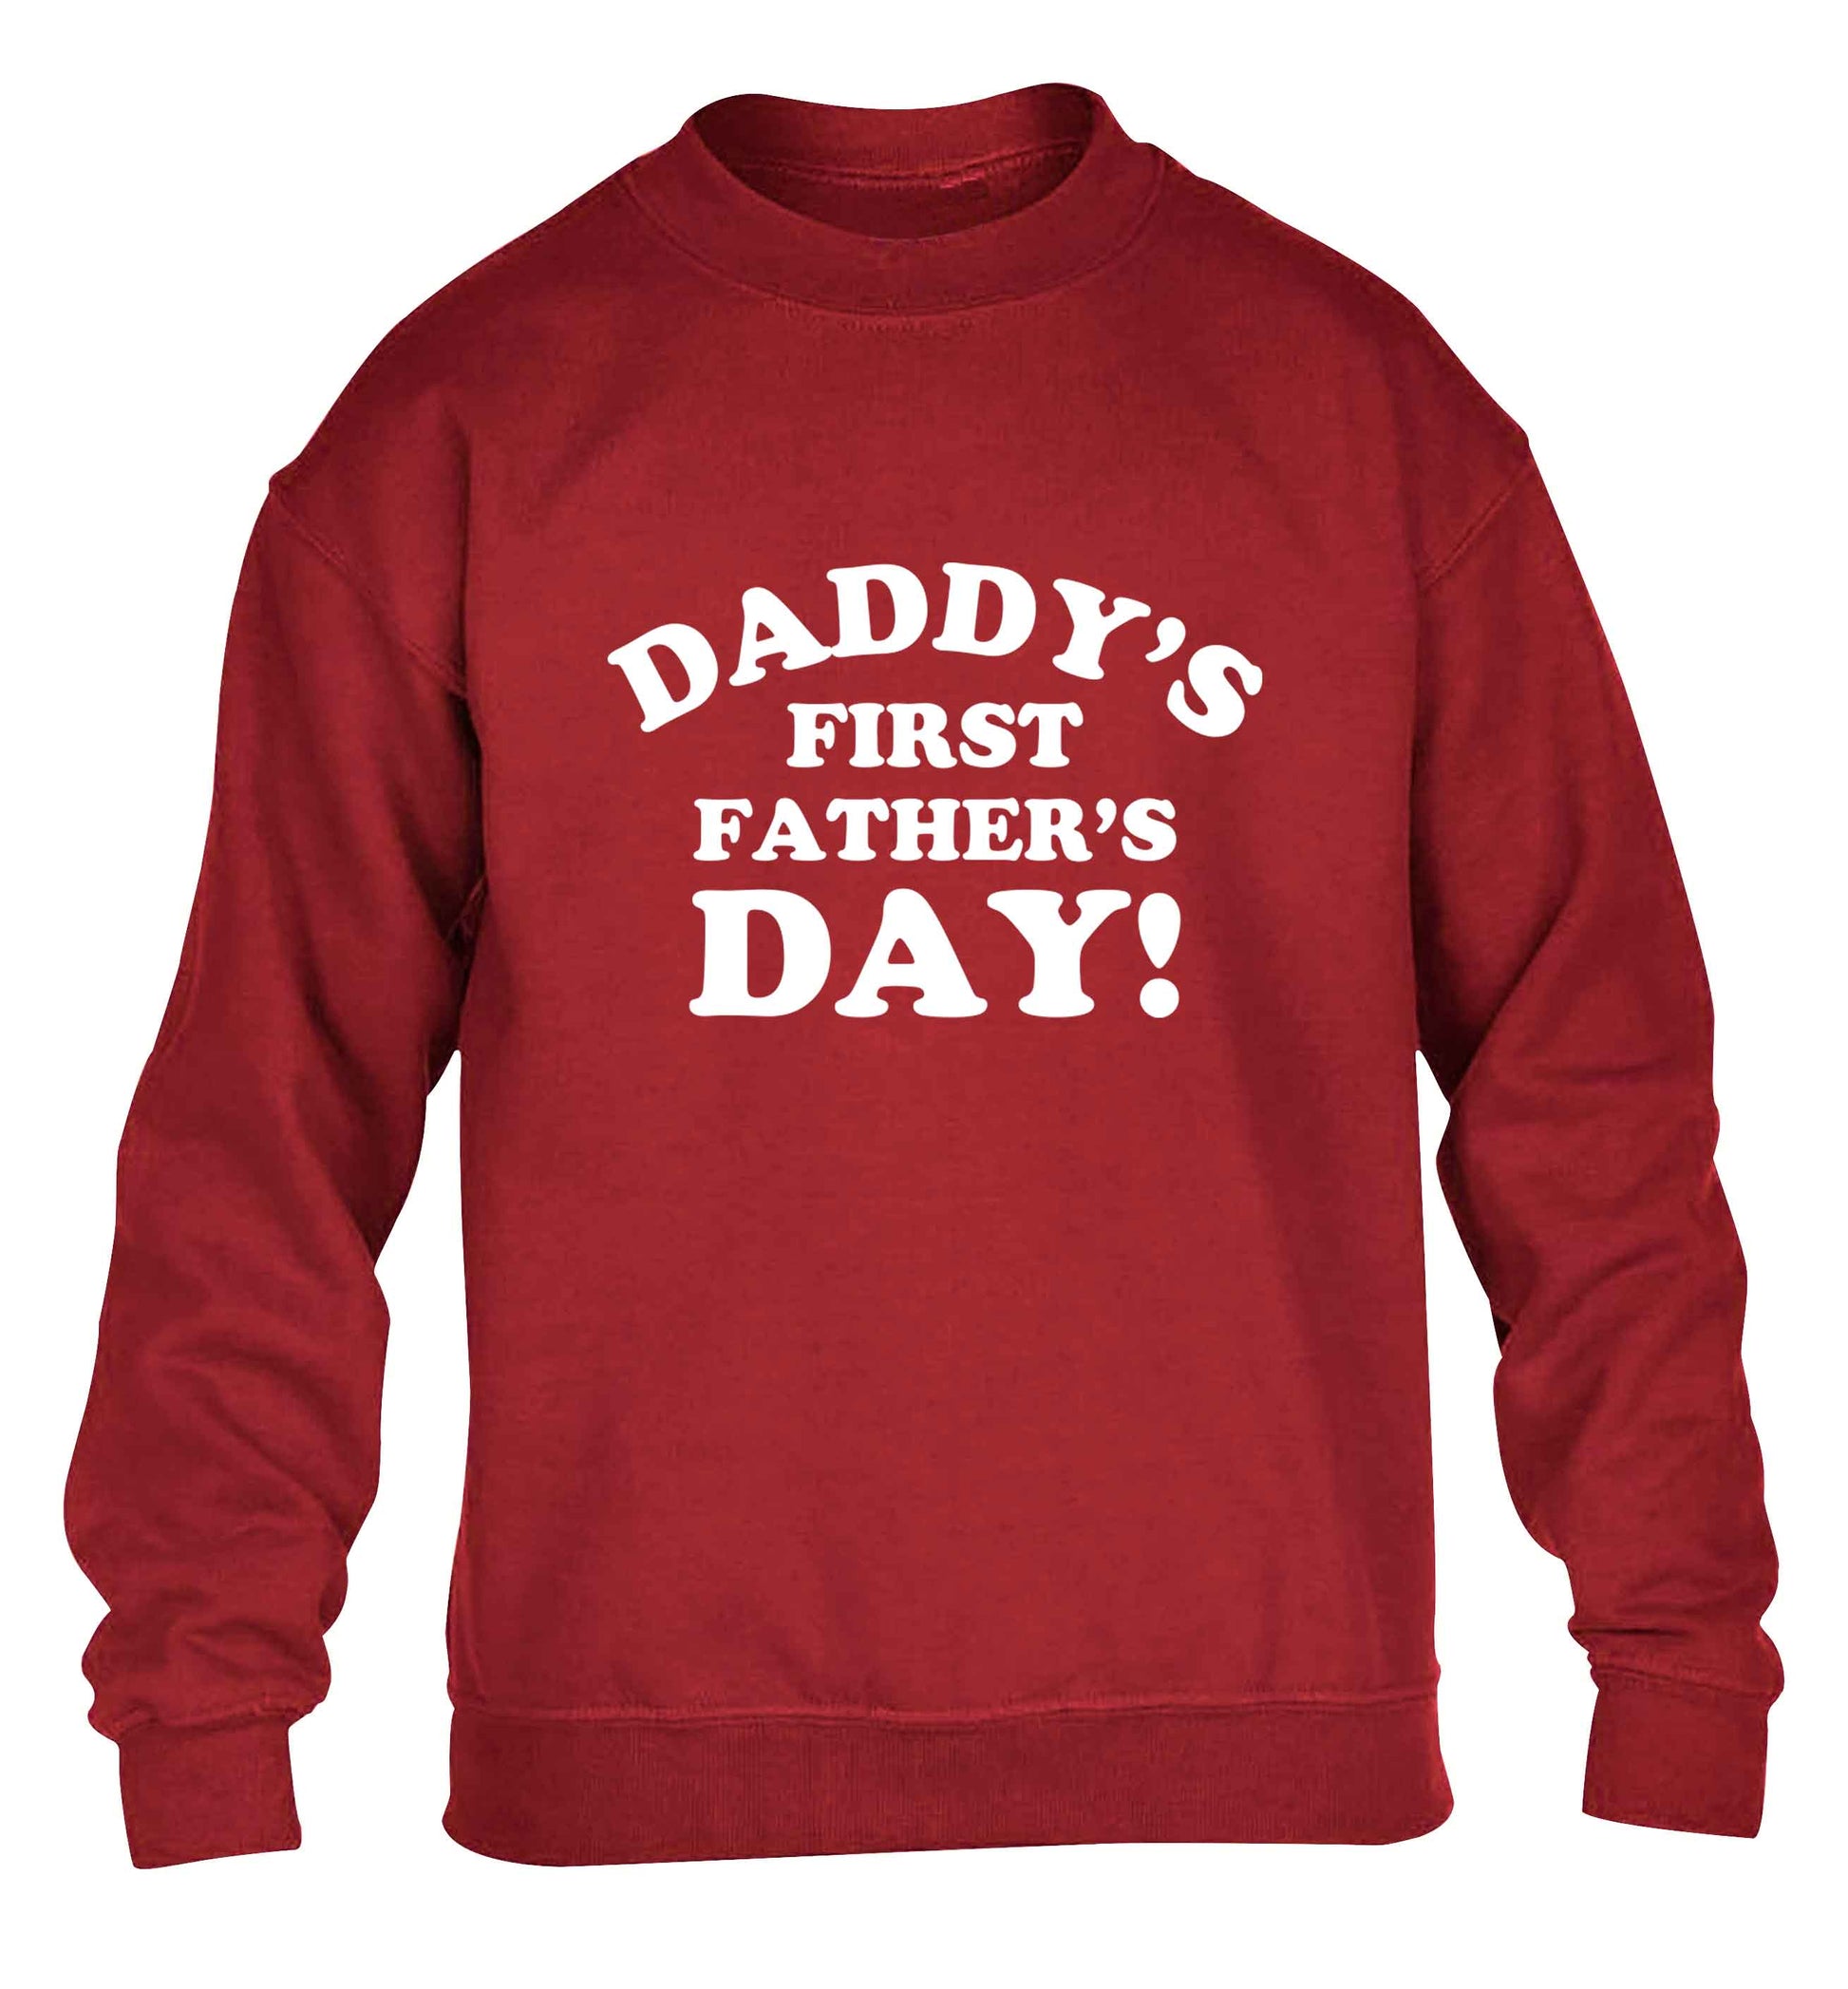 Daddy's first father's day children's grey sweater 12-13 Years